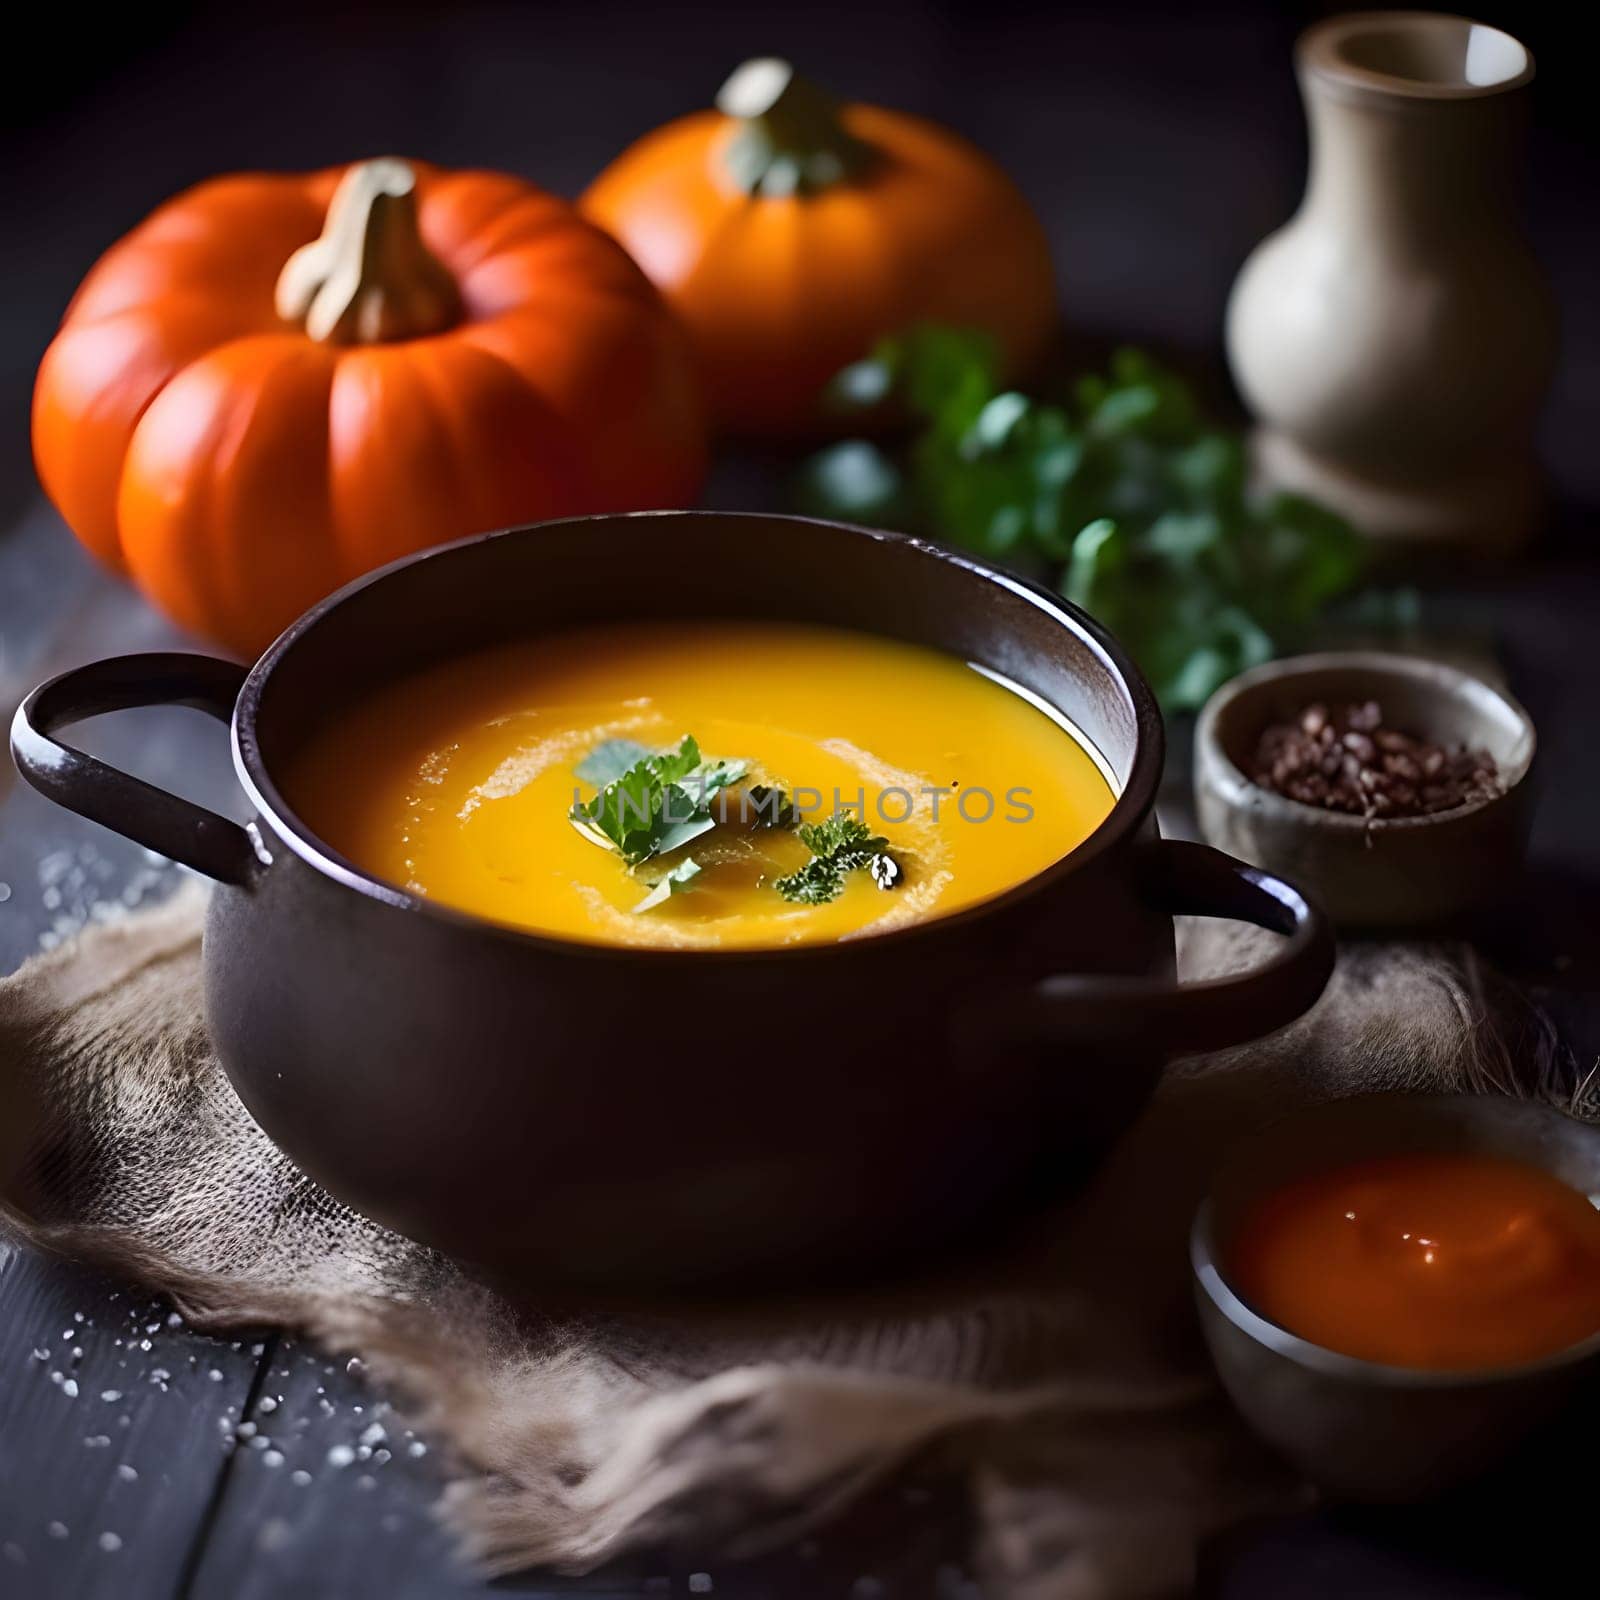 Pumpkin soup with parsley in a small black pot around pumpkins and spices. Pumpkin as a dish of thanksgiving for the harvest. An atmosphere of joy and celebration.